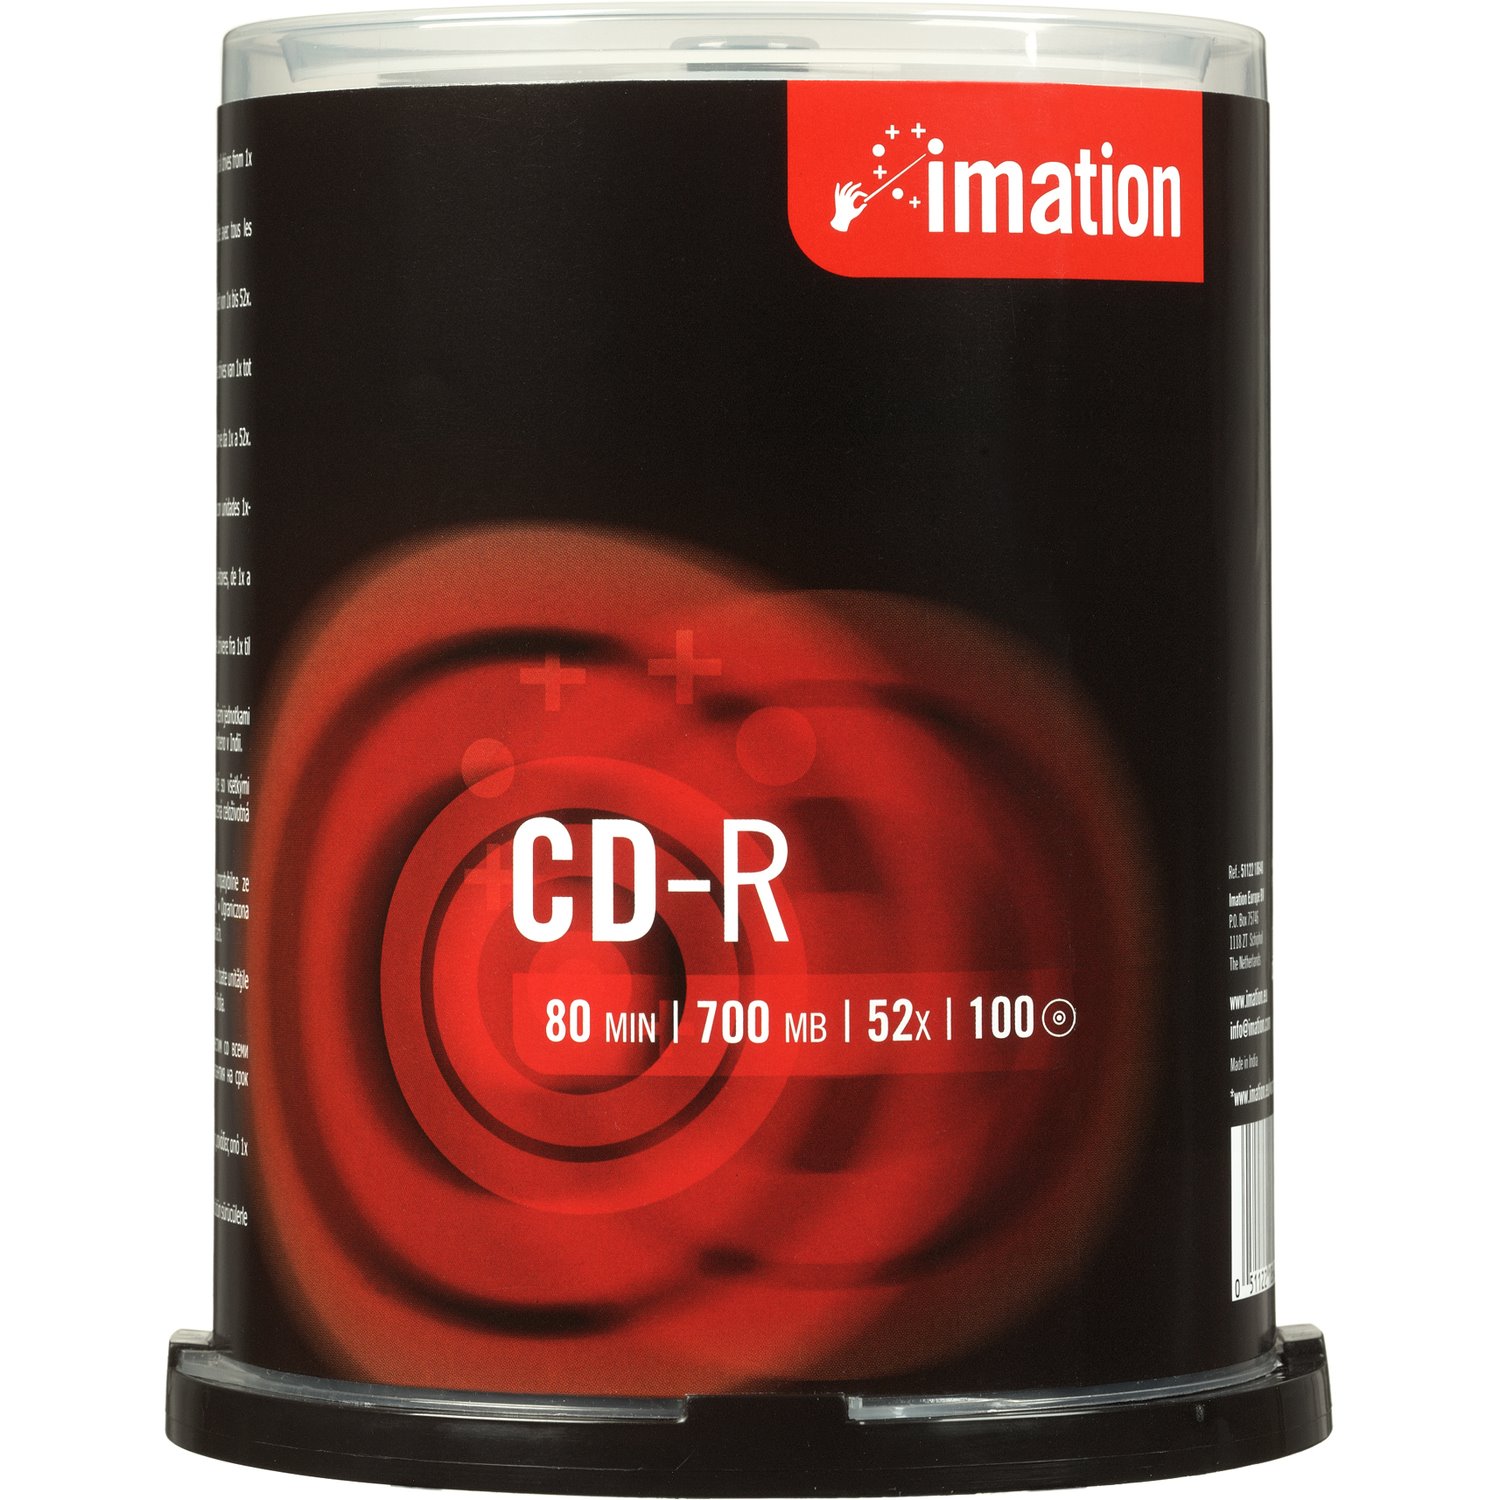 Imation I18648 CD Recordable Media - CD-R - 52x - 700 MB - 100 Pack Spindle